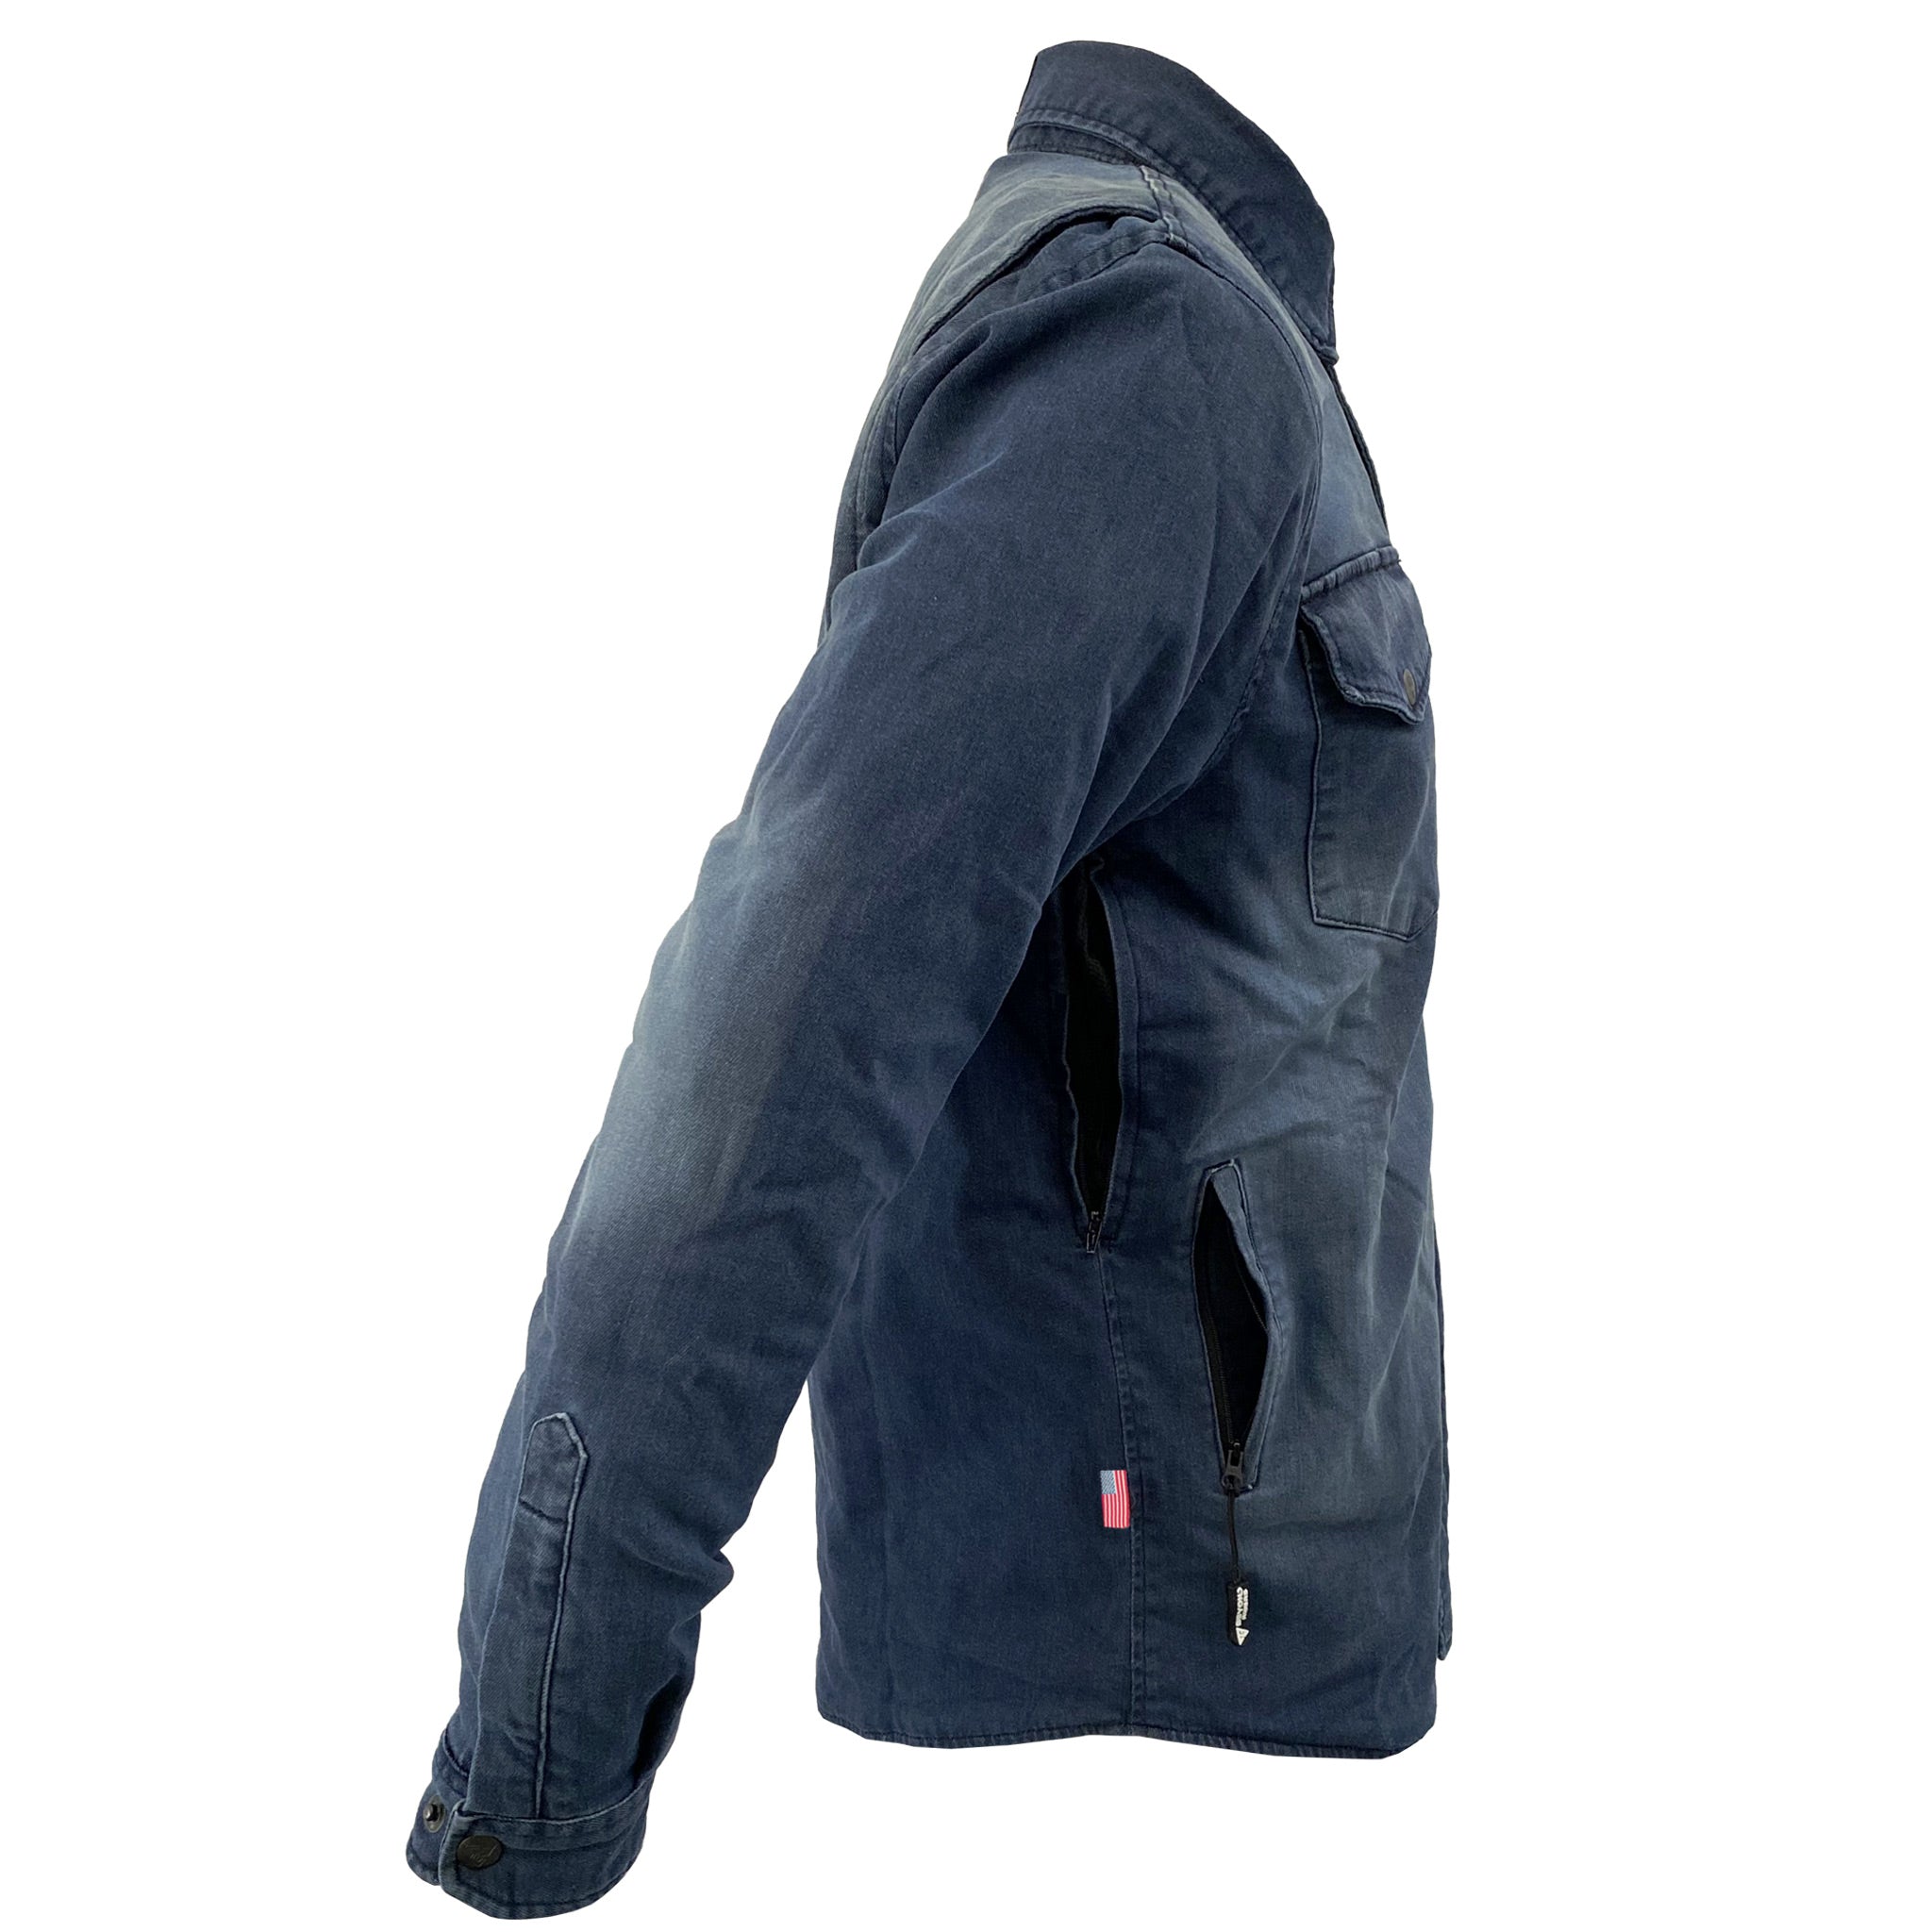 Protective Jeans Jacket - Blue Faded with Pads